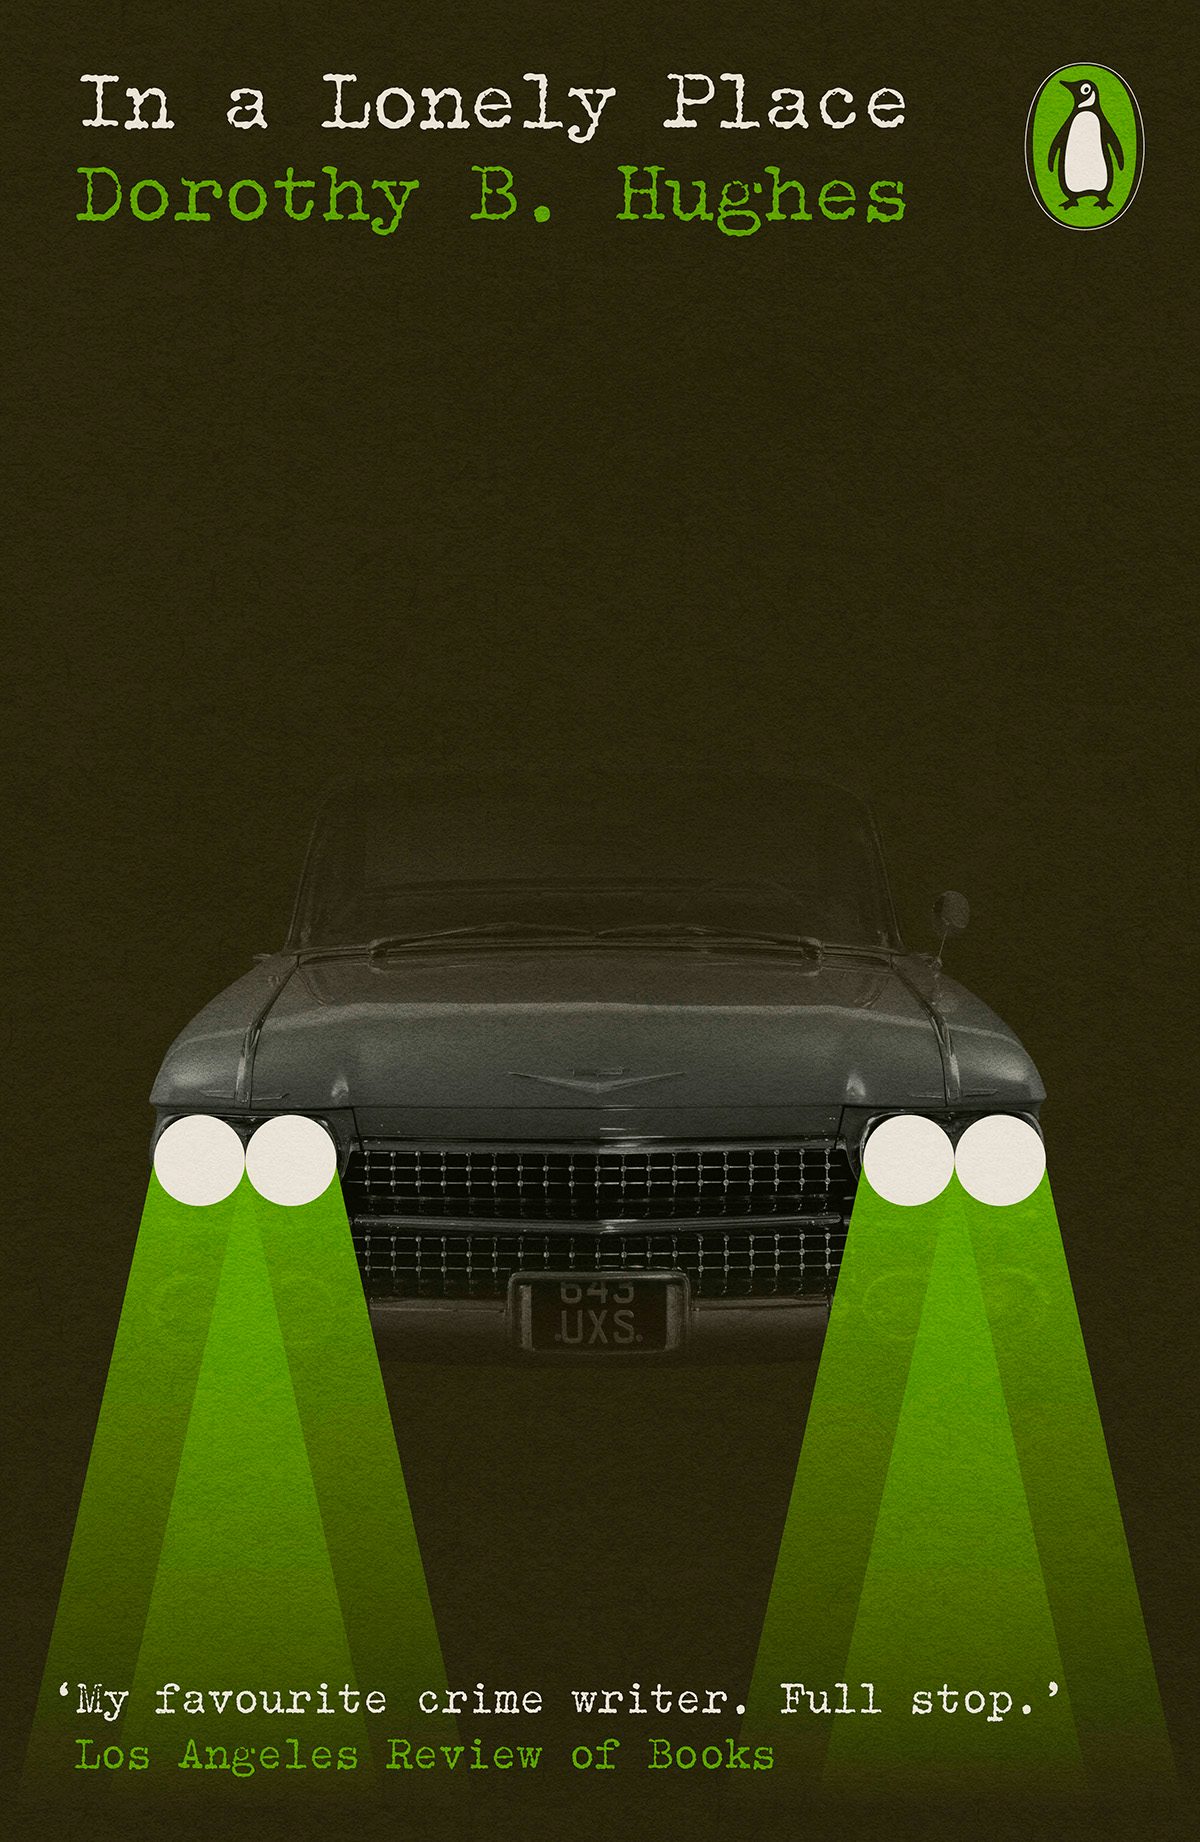 Image shows the cover of In a Lonely Place from Penguin Modern Classics Crime and Espionage series, showing a muted illustration of a car bonnet covered in shadows except for triangular green beams from the car headlights